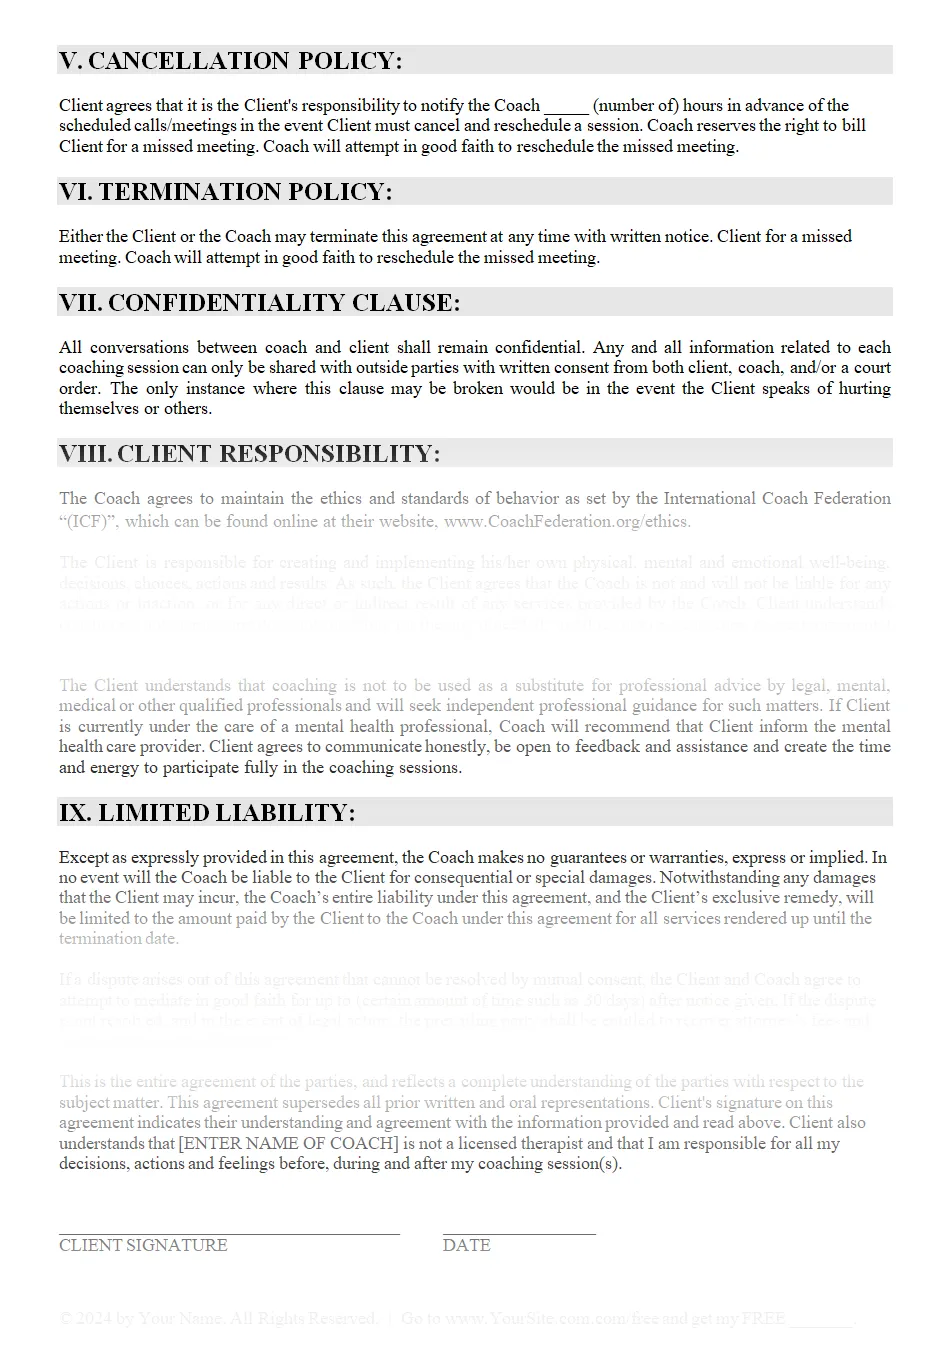 Coaching Terms & Agreement (2 PAGES)